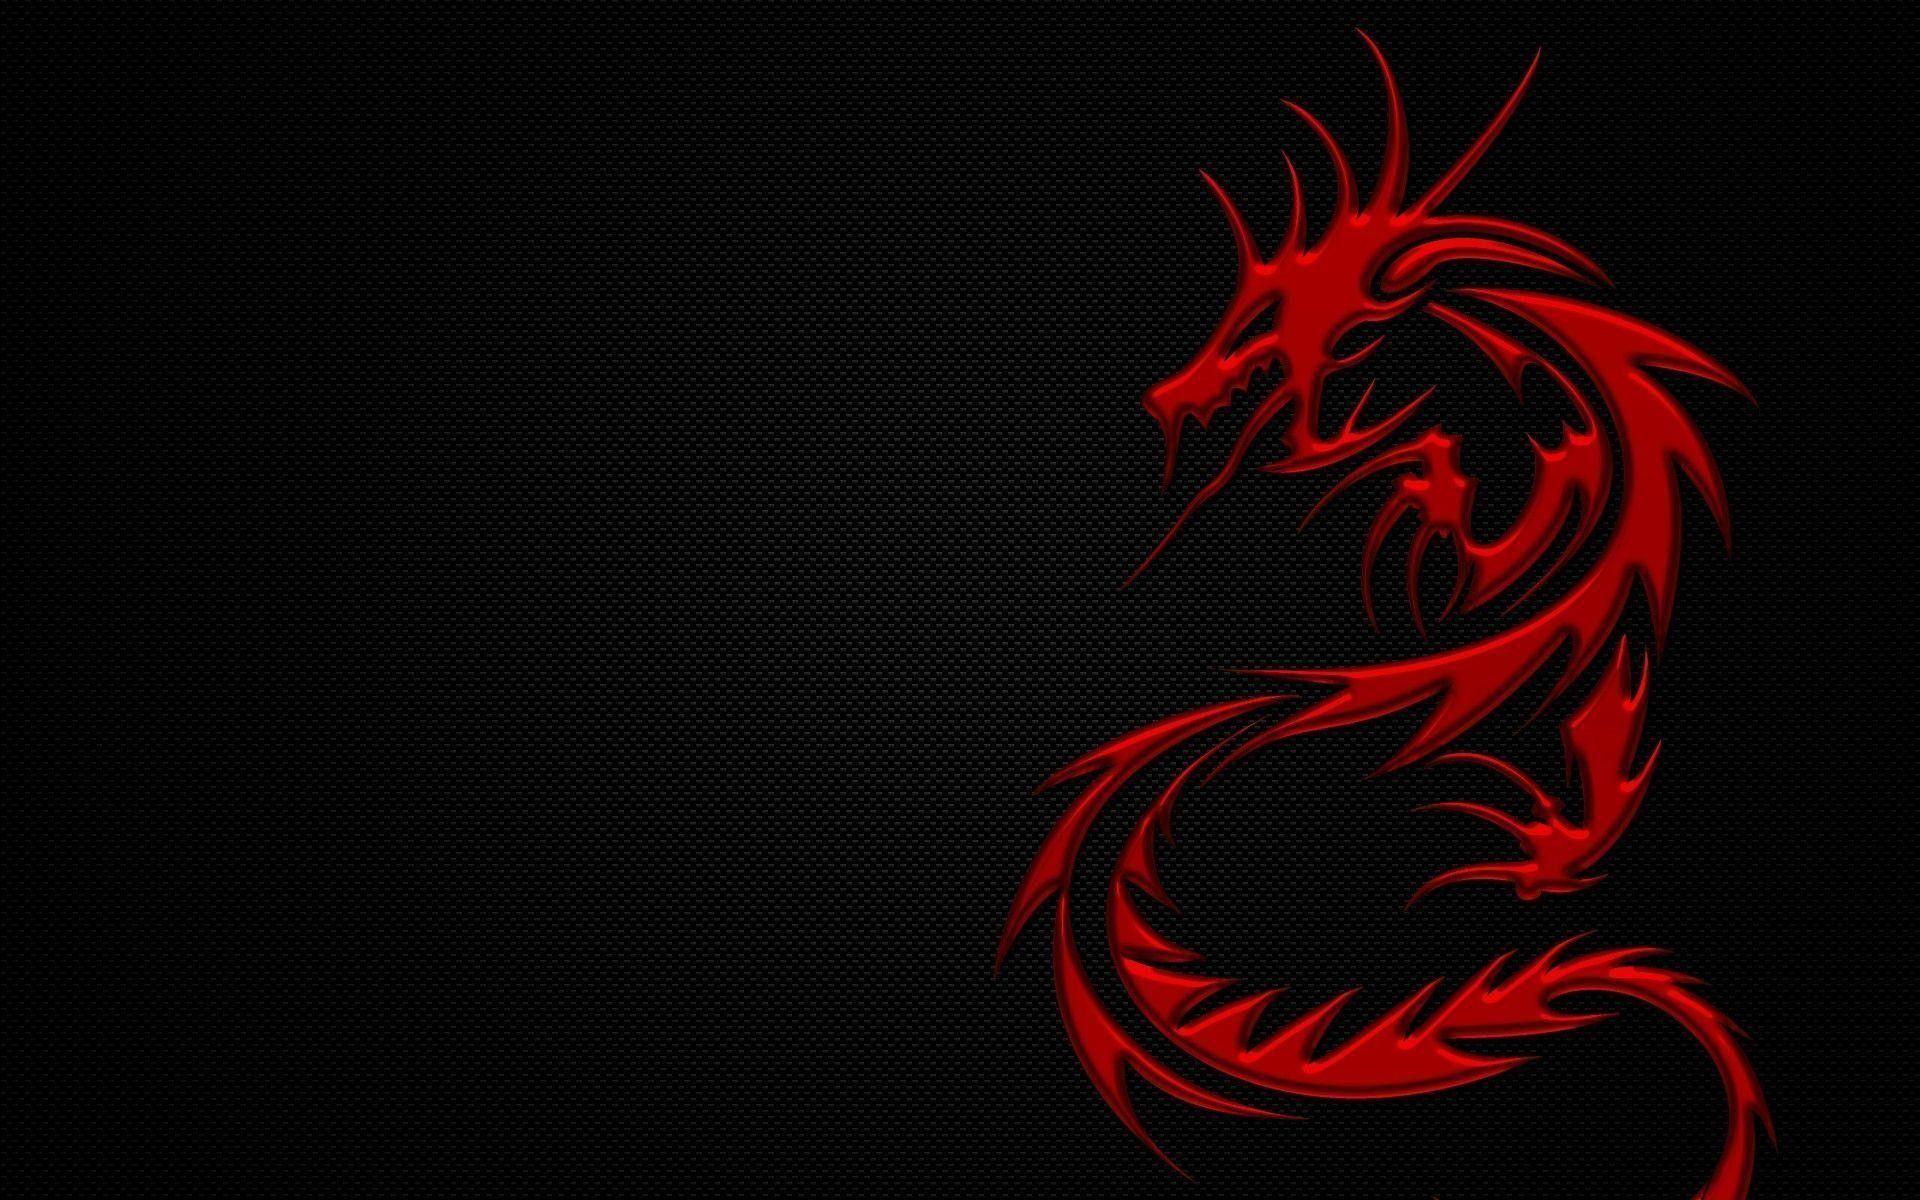 HD wallpaper red and black dragon wallpaper world of warcraft fire face   Wallpaper Flare